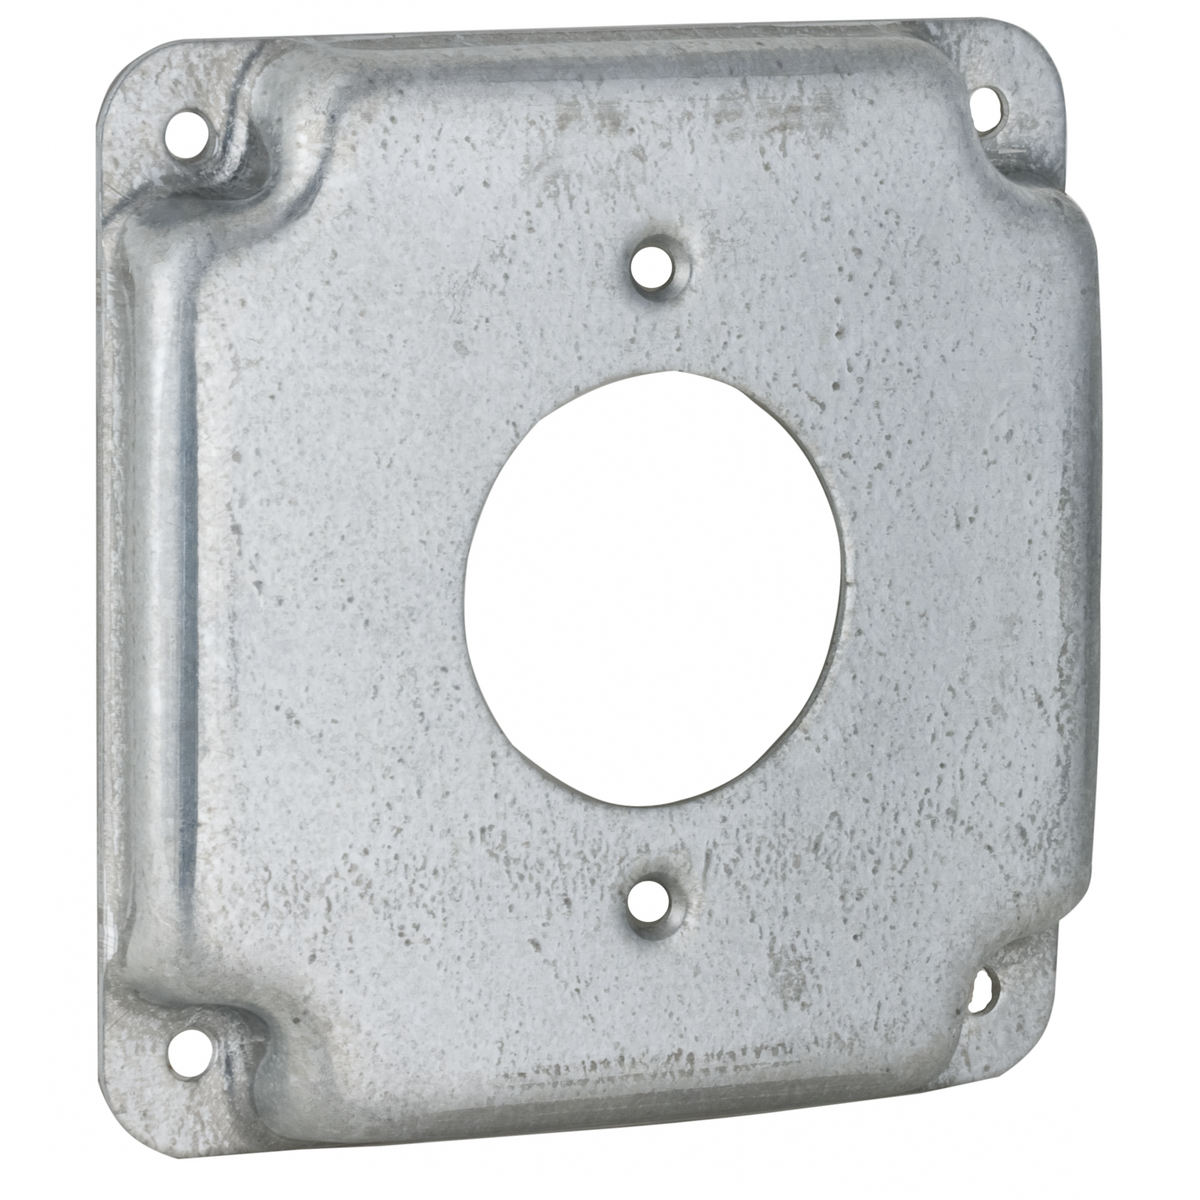 RACO 812C 4" SQUARE EXPOSED WORK COVER, 20A RECEPTACLE 1.620" AND SOME 30A RECEPTACLES TURN LOCK